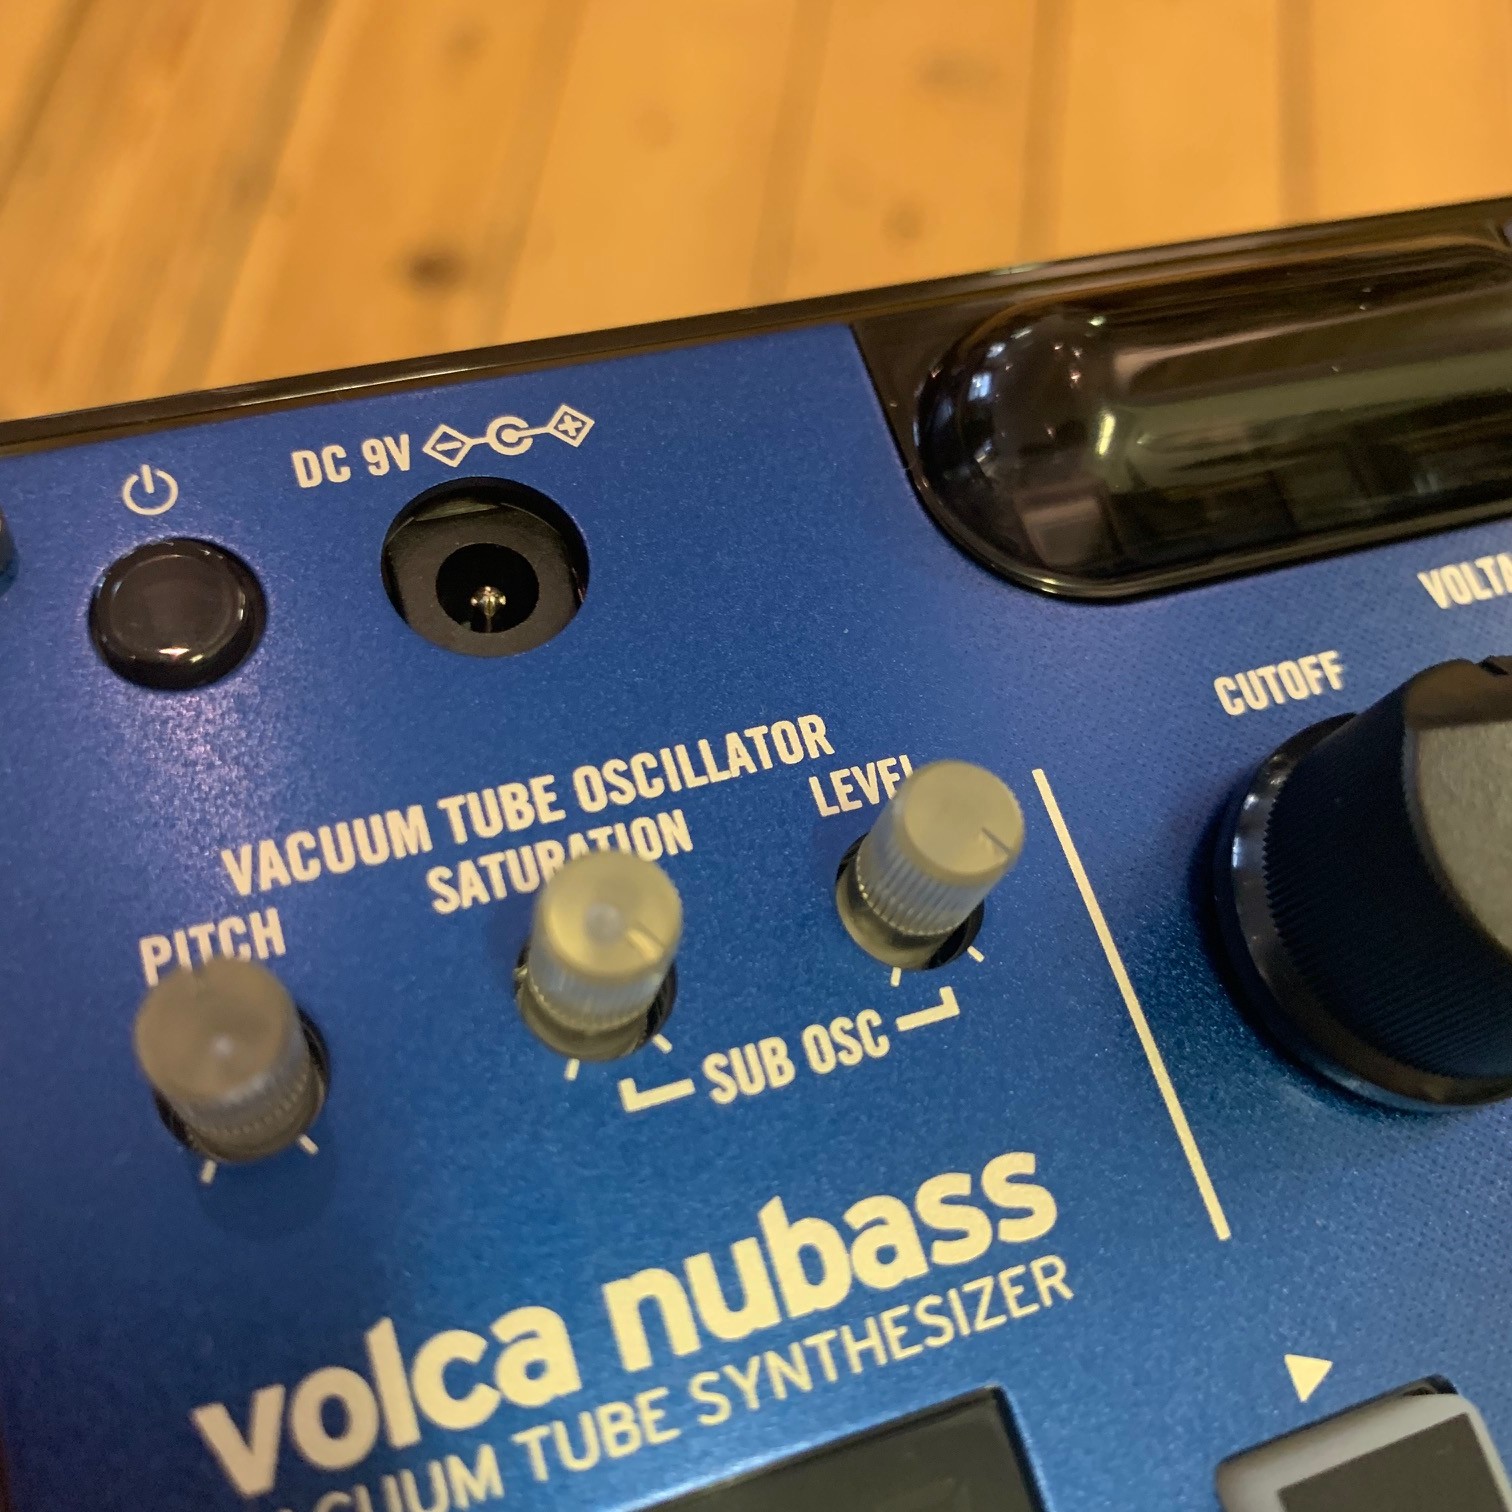 Korg Volca Nubass analogue synth review | Juno Daily